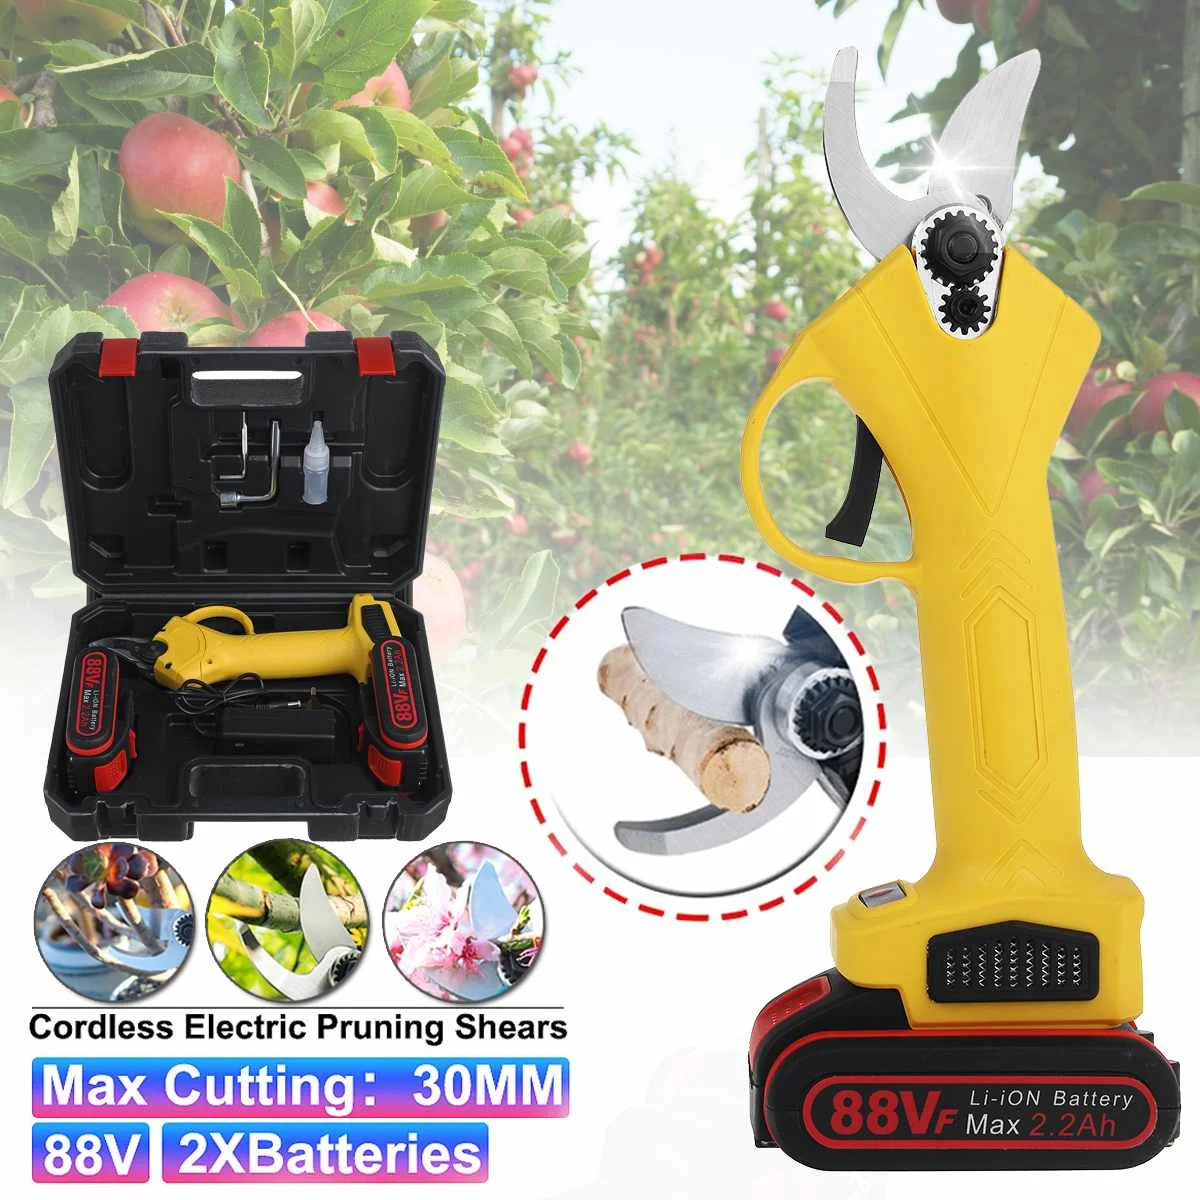 

30mm Cordless Electric Pruning Shears Secateur Pruner Electric Tree Branches Cutter Fruit Tree Bonsai Pruning 88VF Battery